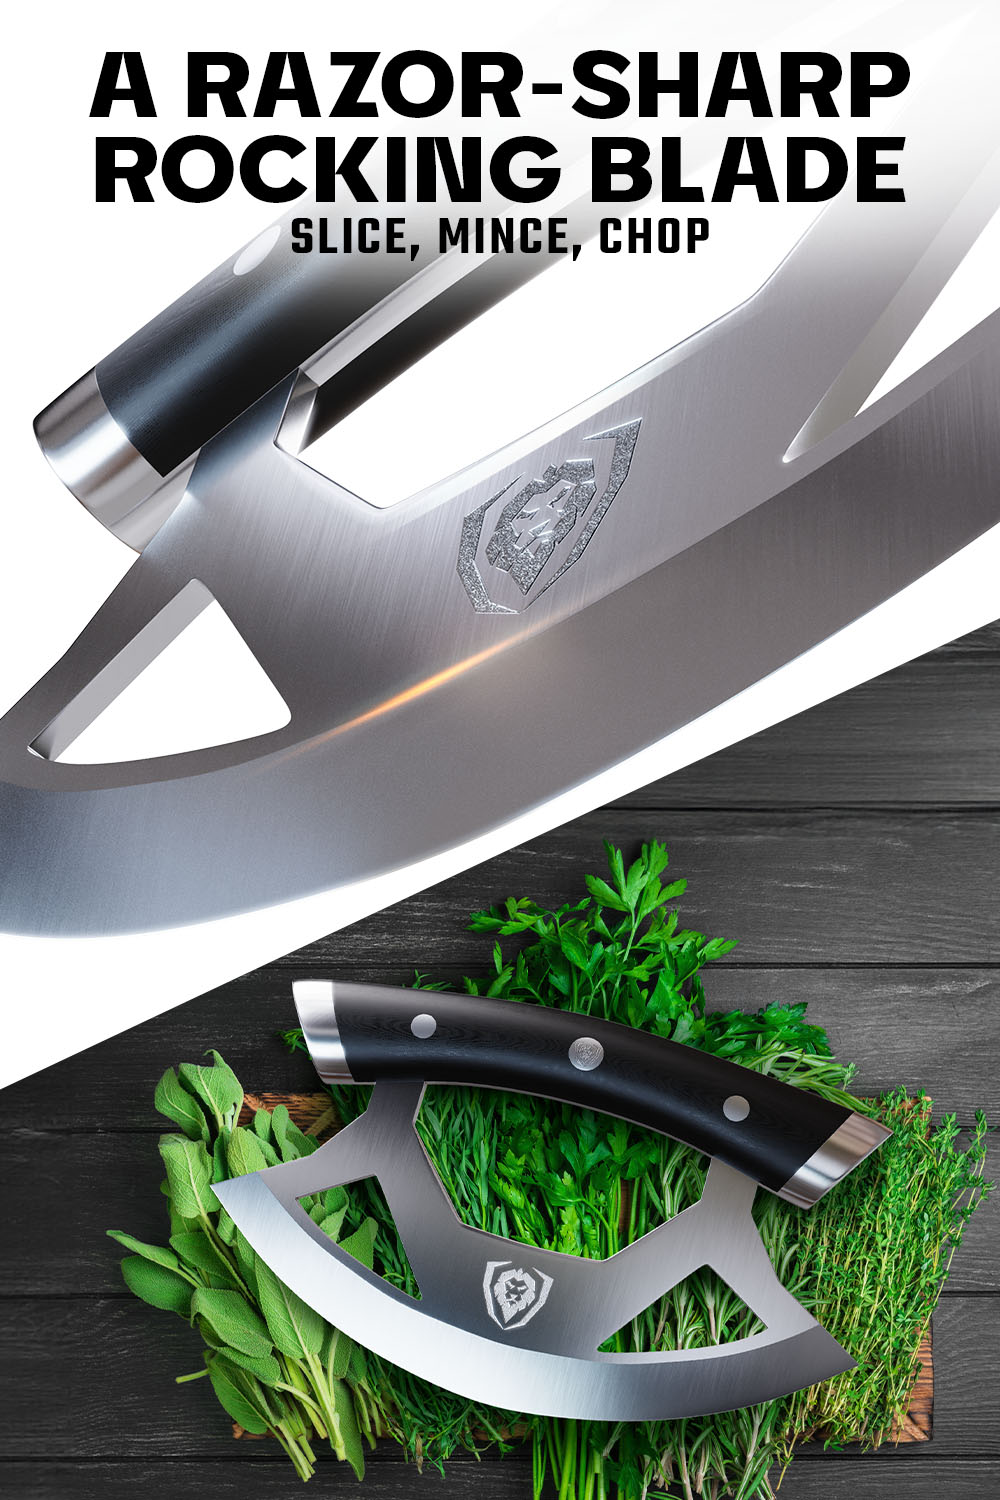 Dalstrong gladiator series 7 inch ulu knife with black handle featuring it's razor sharp rocking blade.